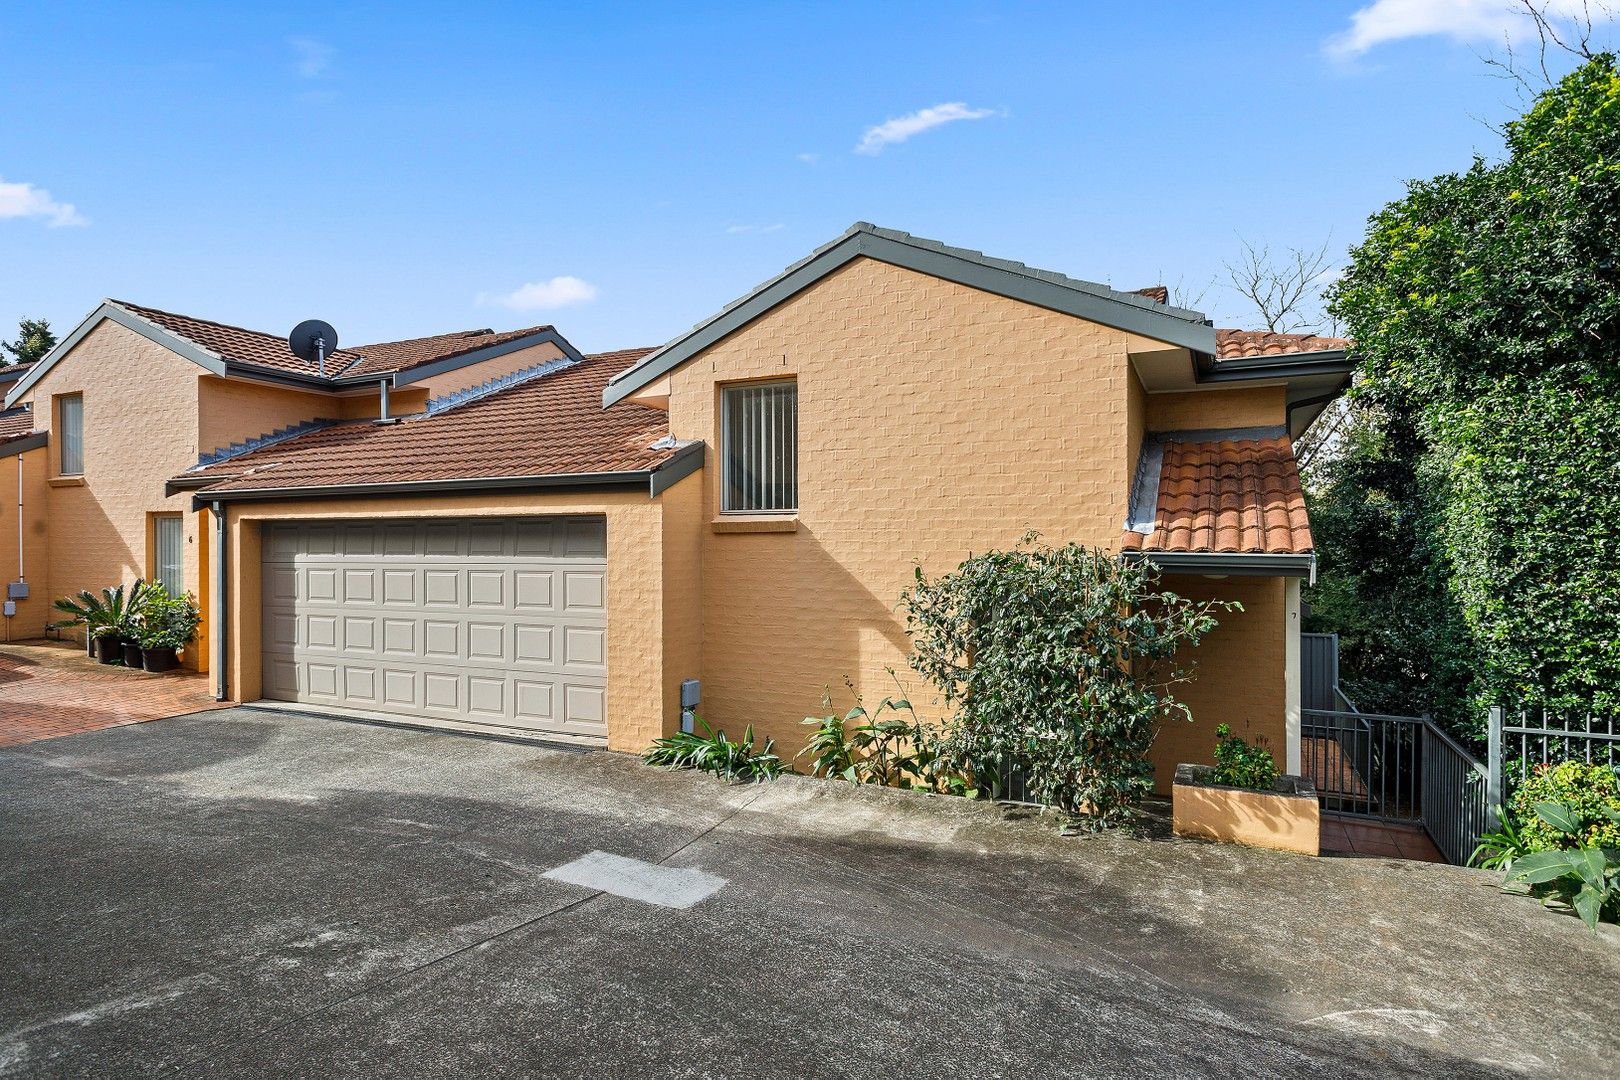 7/31-33 Hillcrest Street, Wollongong NSW 2500, Image 0